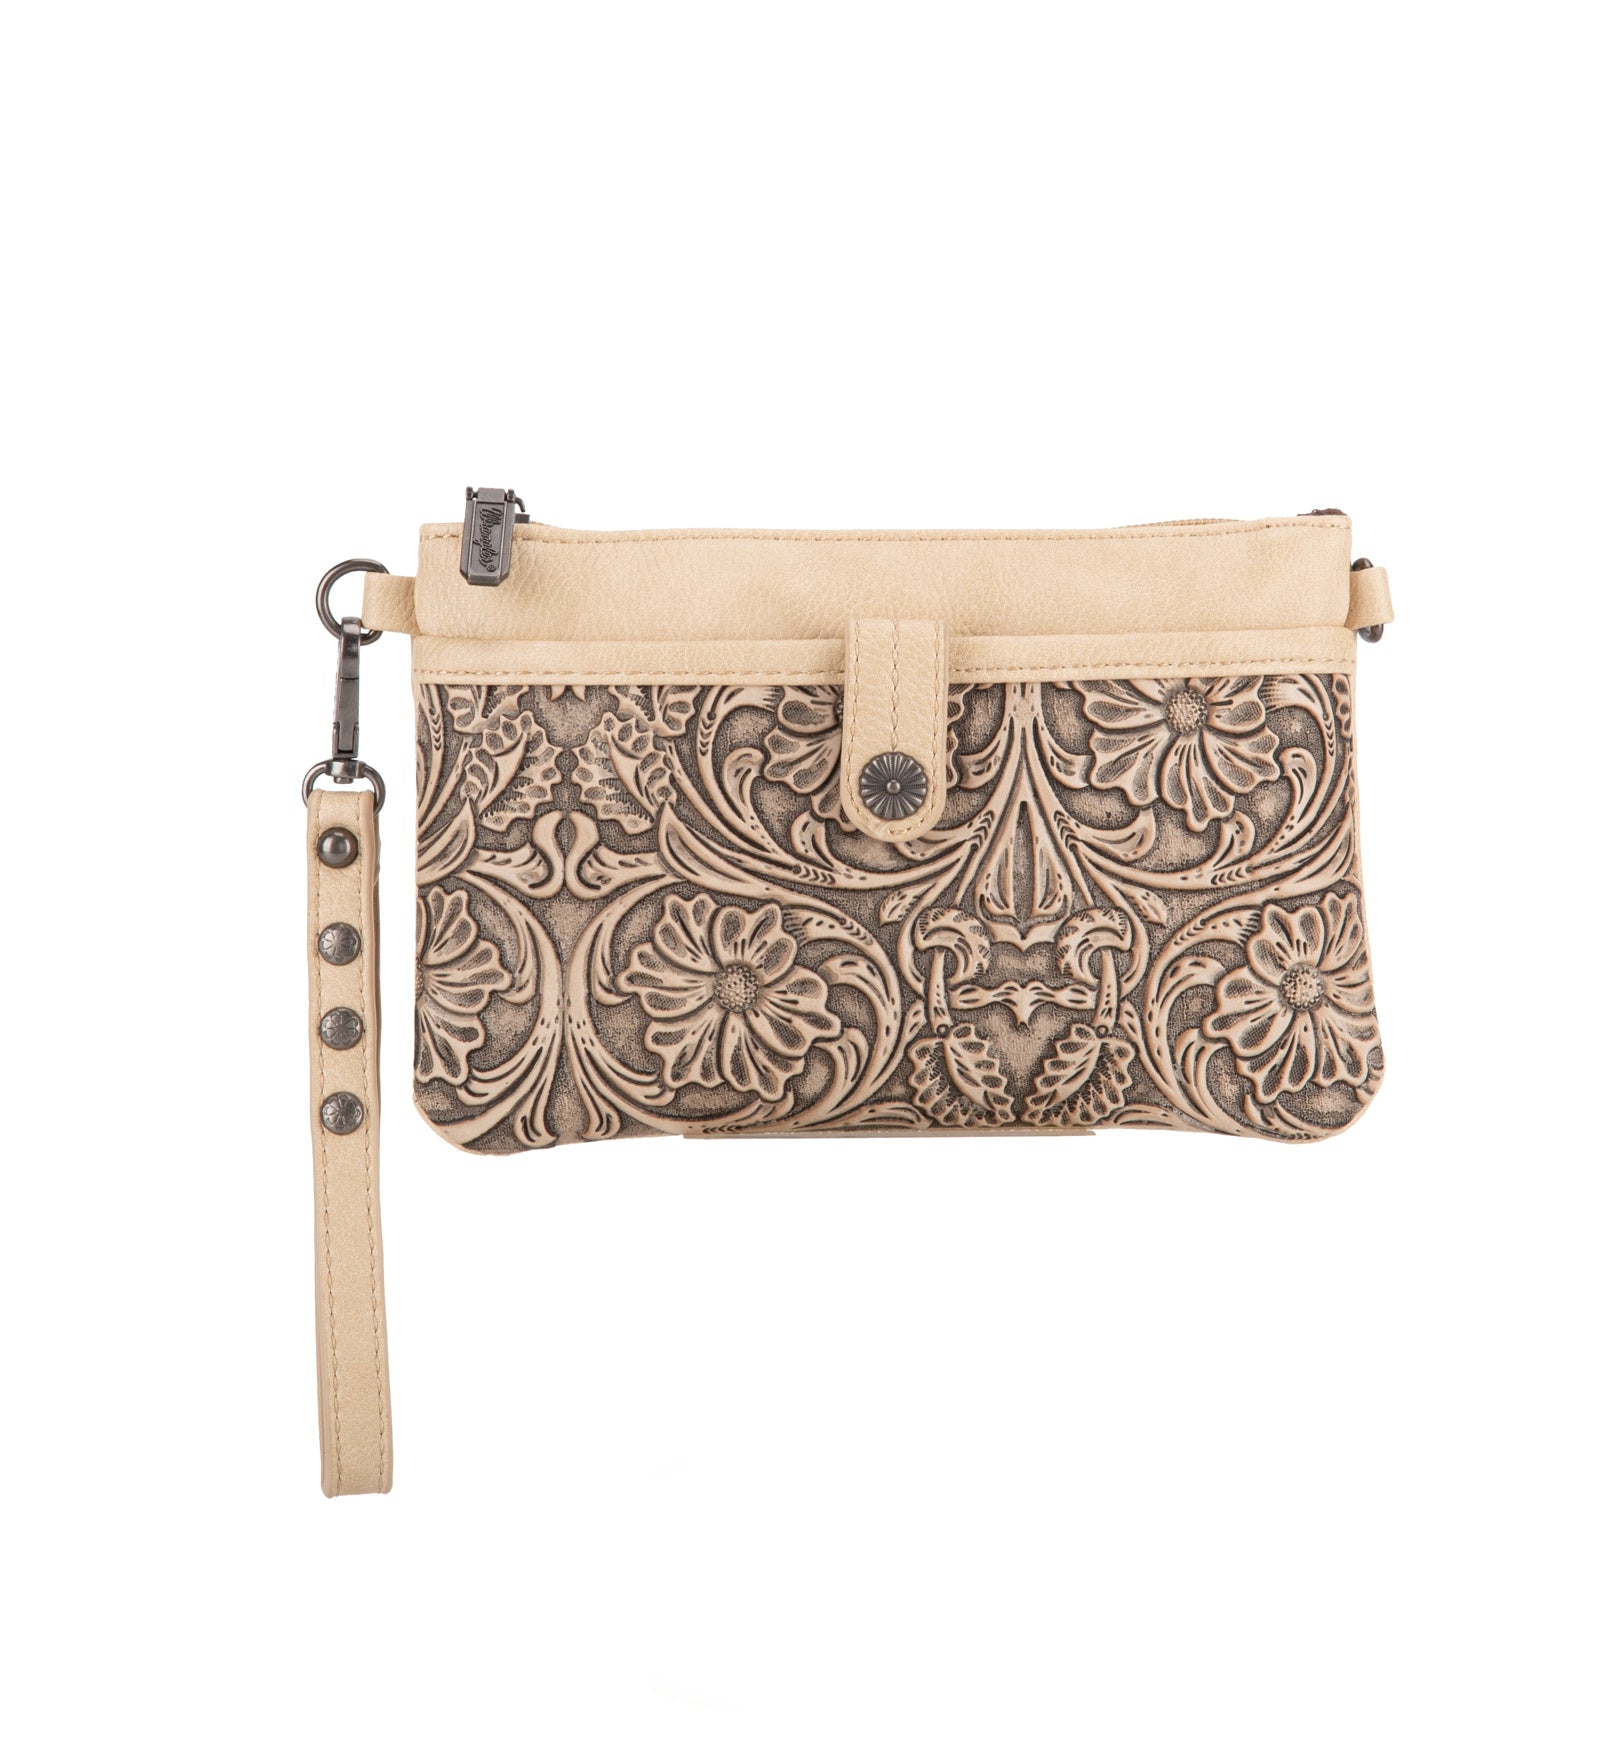 Wrangler Vintage Floral Tooled Collection Crossbody - Cowgirl Wear